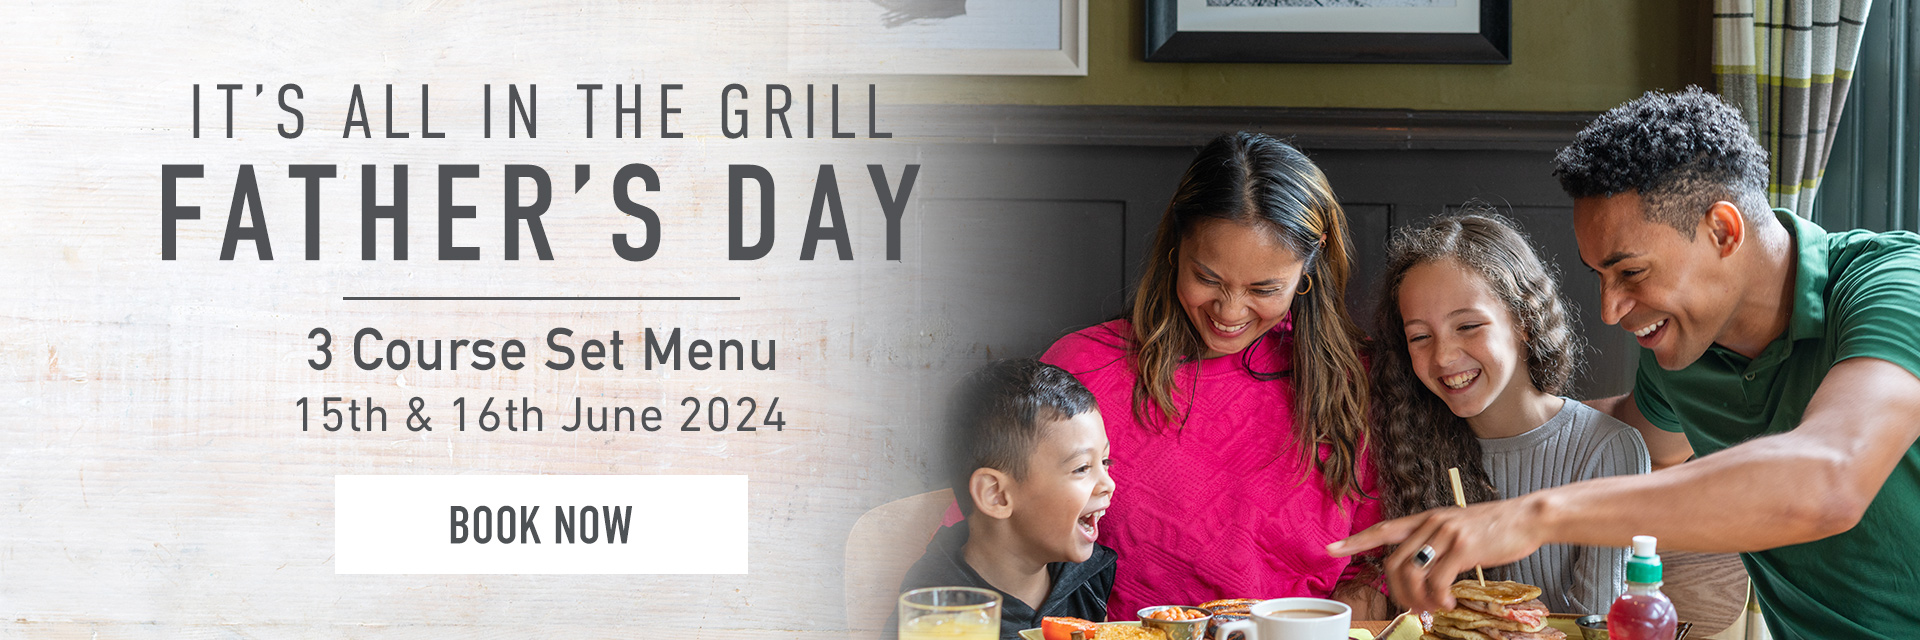 Father’s Day at Harvester Clifton Moor